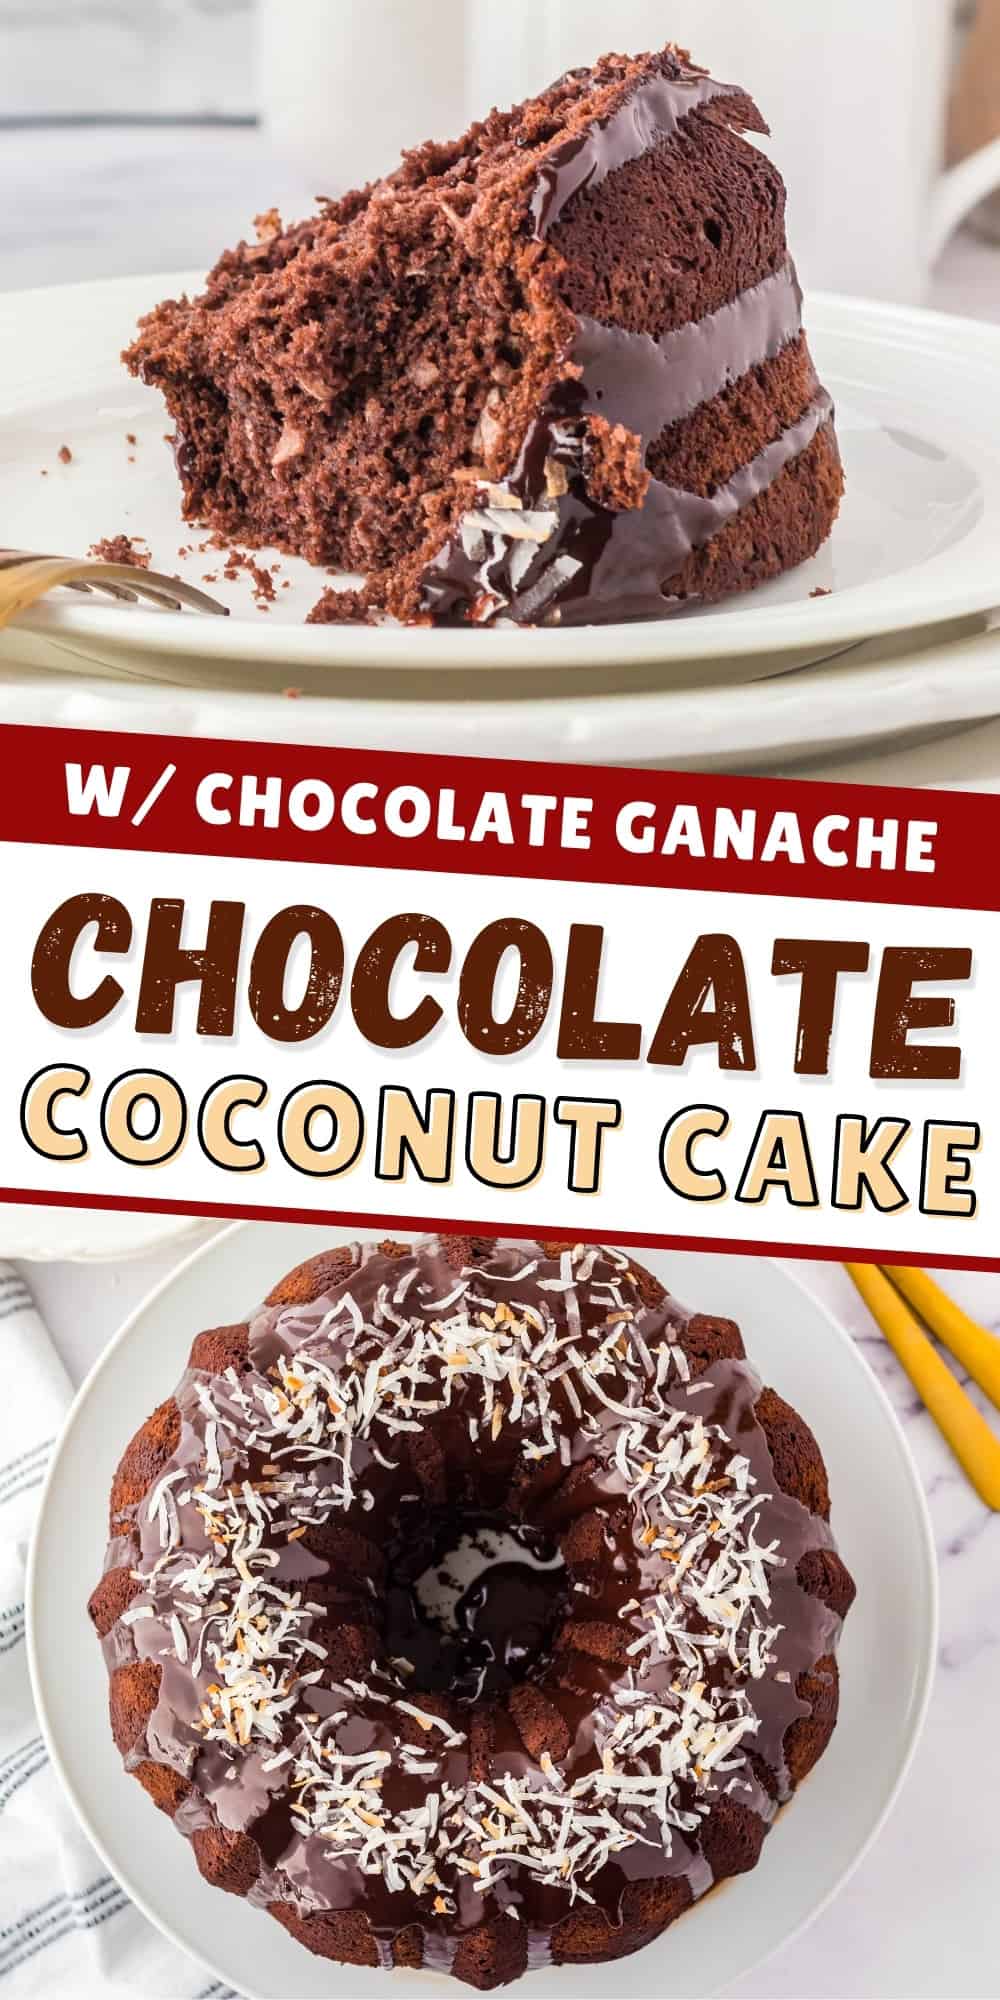 Tall image collage for pinterest. Reads: Chocolate Coconut Cake with Chocolate Ganache.